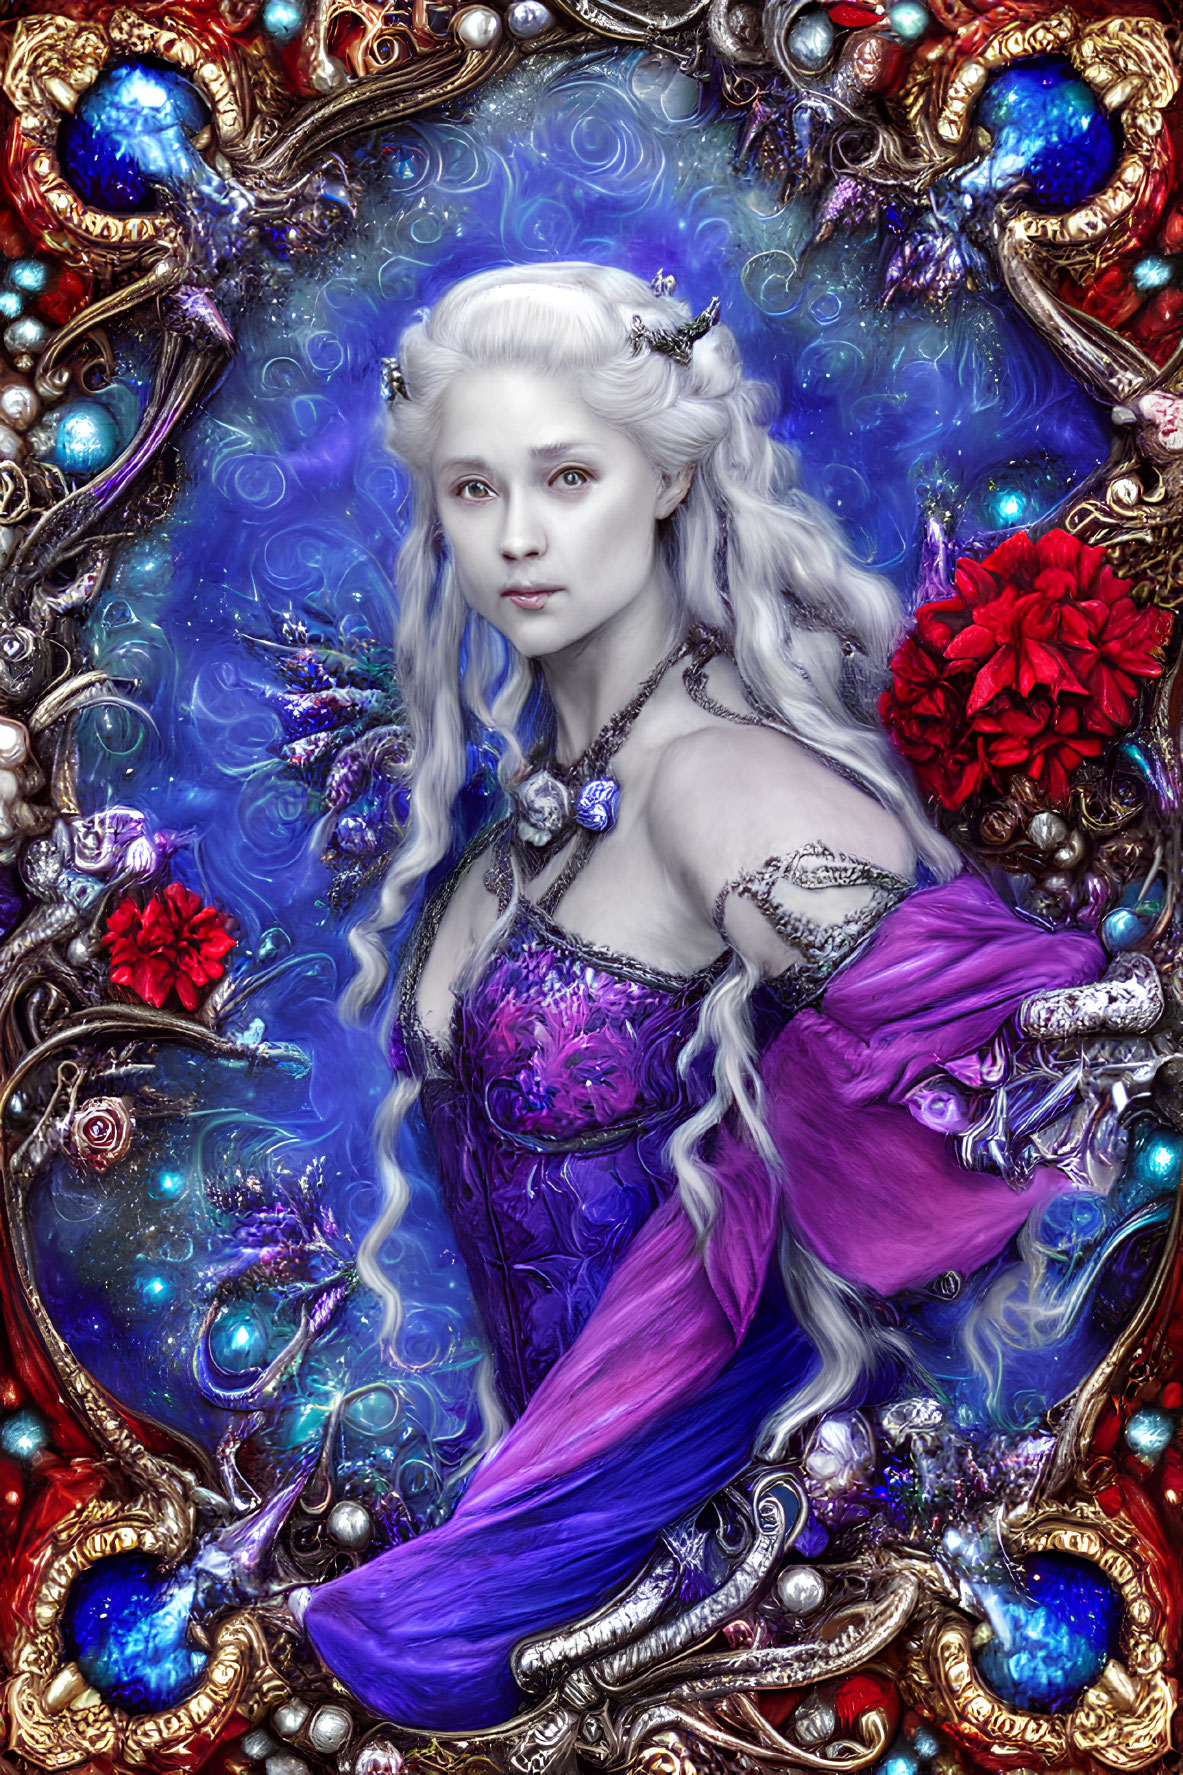 Fair-skinned elf-like woman in purple dress surrounded by blue magic and red flowers in ornate golden